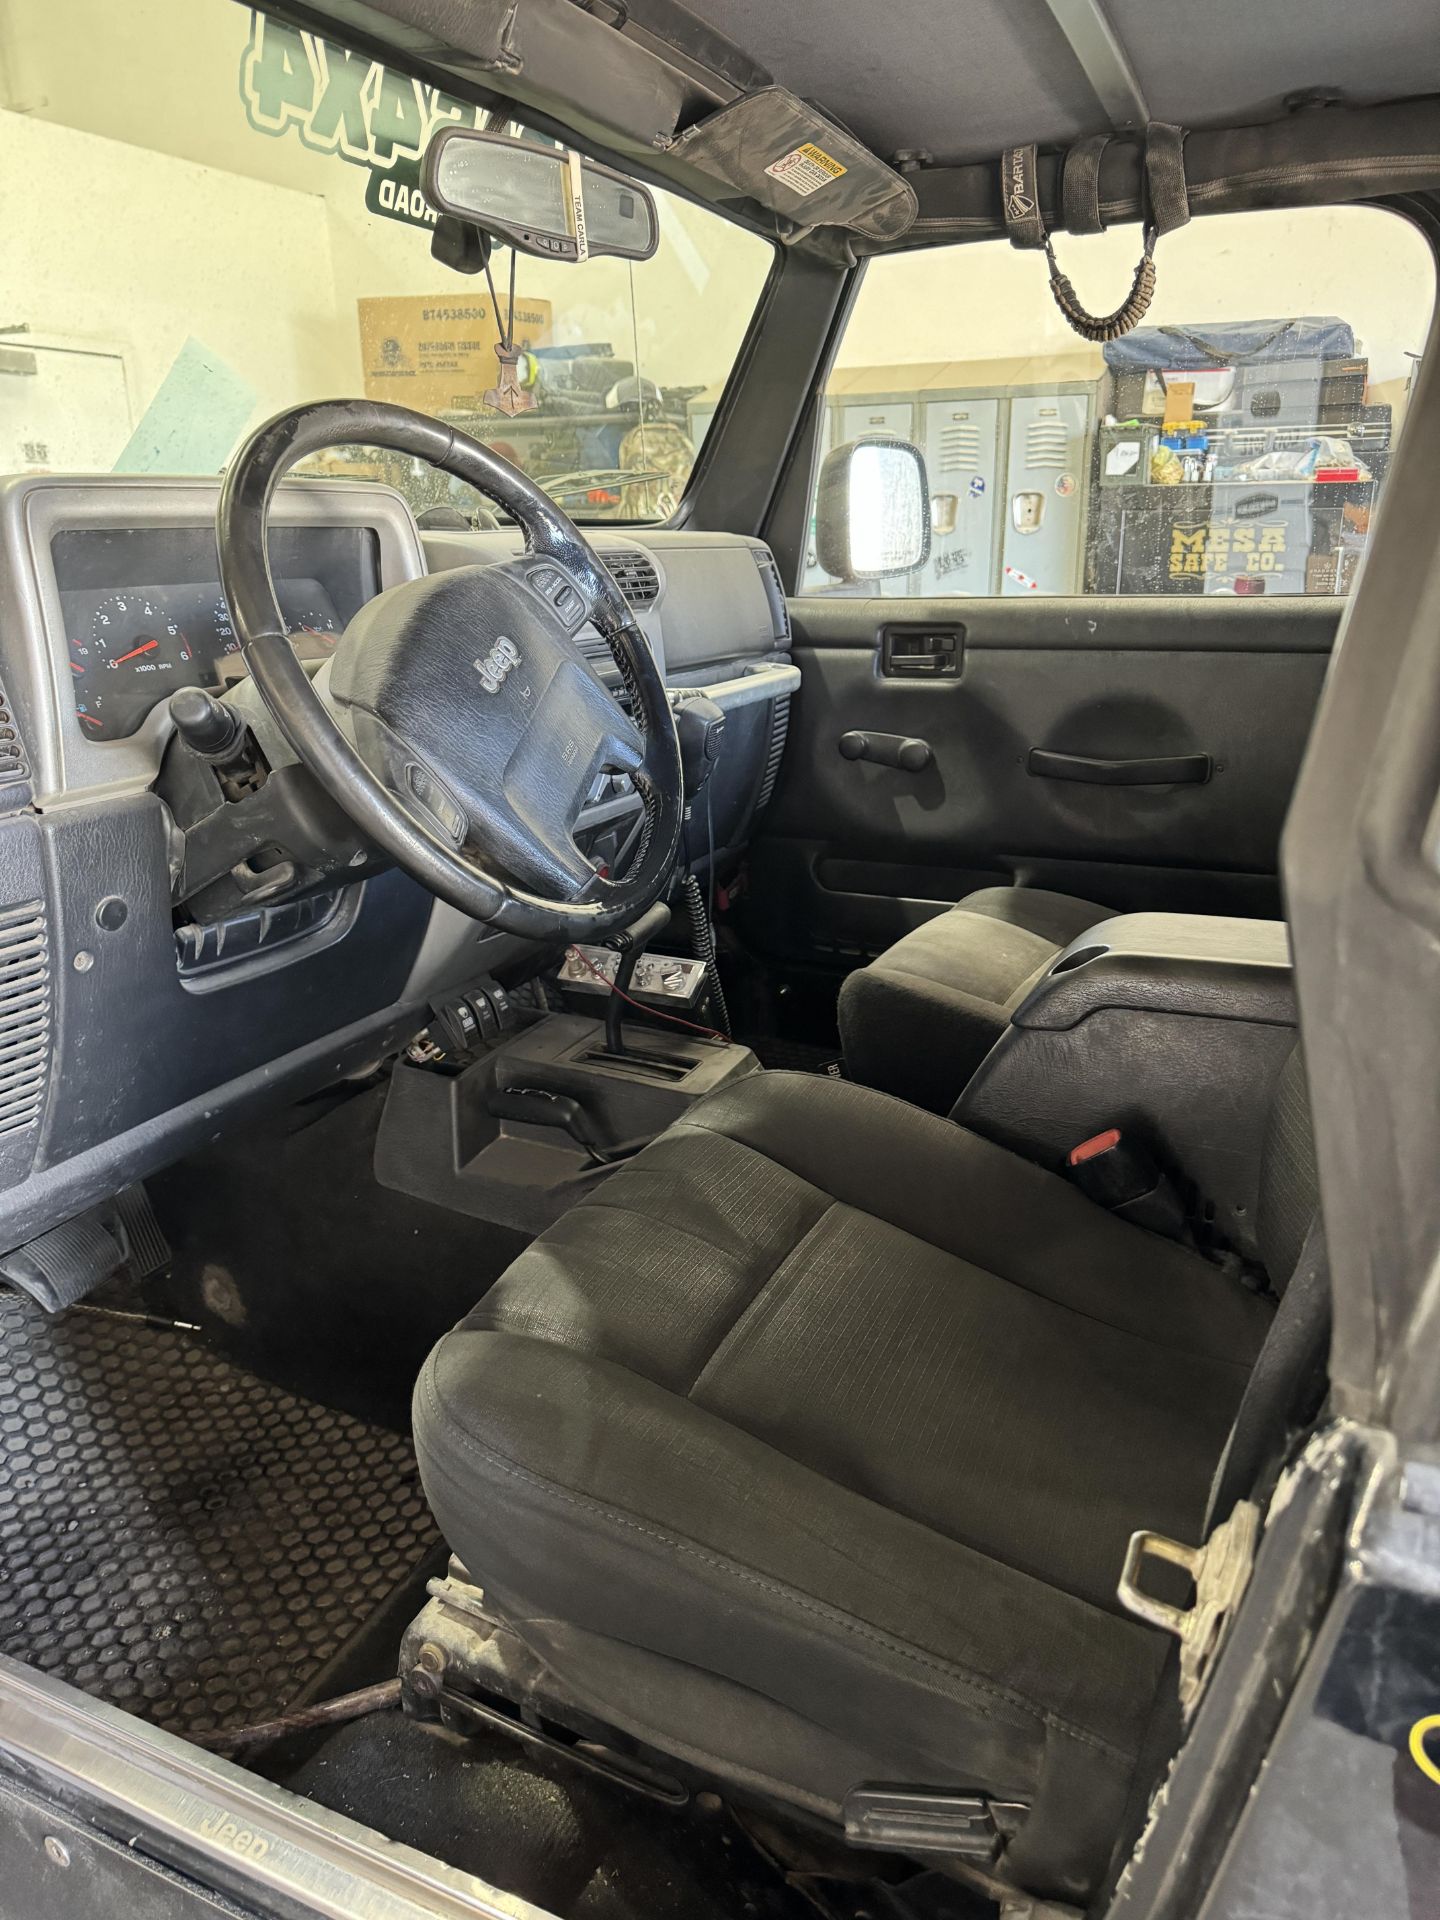 2005 JEEP LJ VERY LIMITED RUN, 2 DOOR, LIFTED , LOCKS FRONT AND REAR ++ - Image 6 of 12